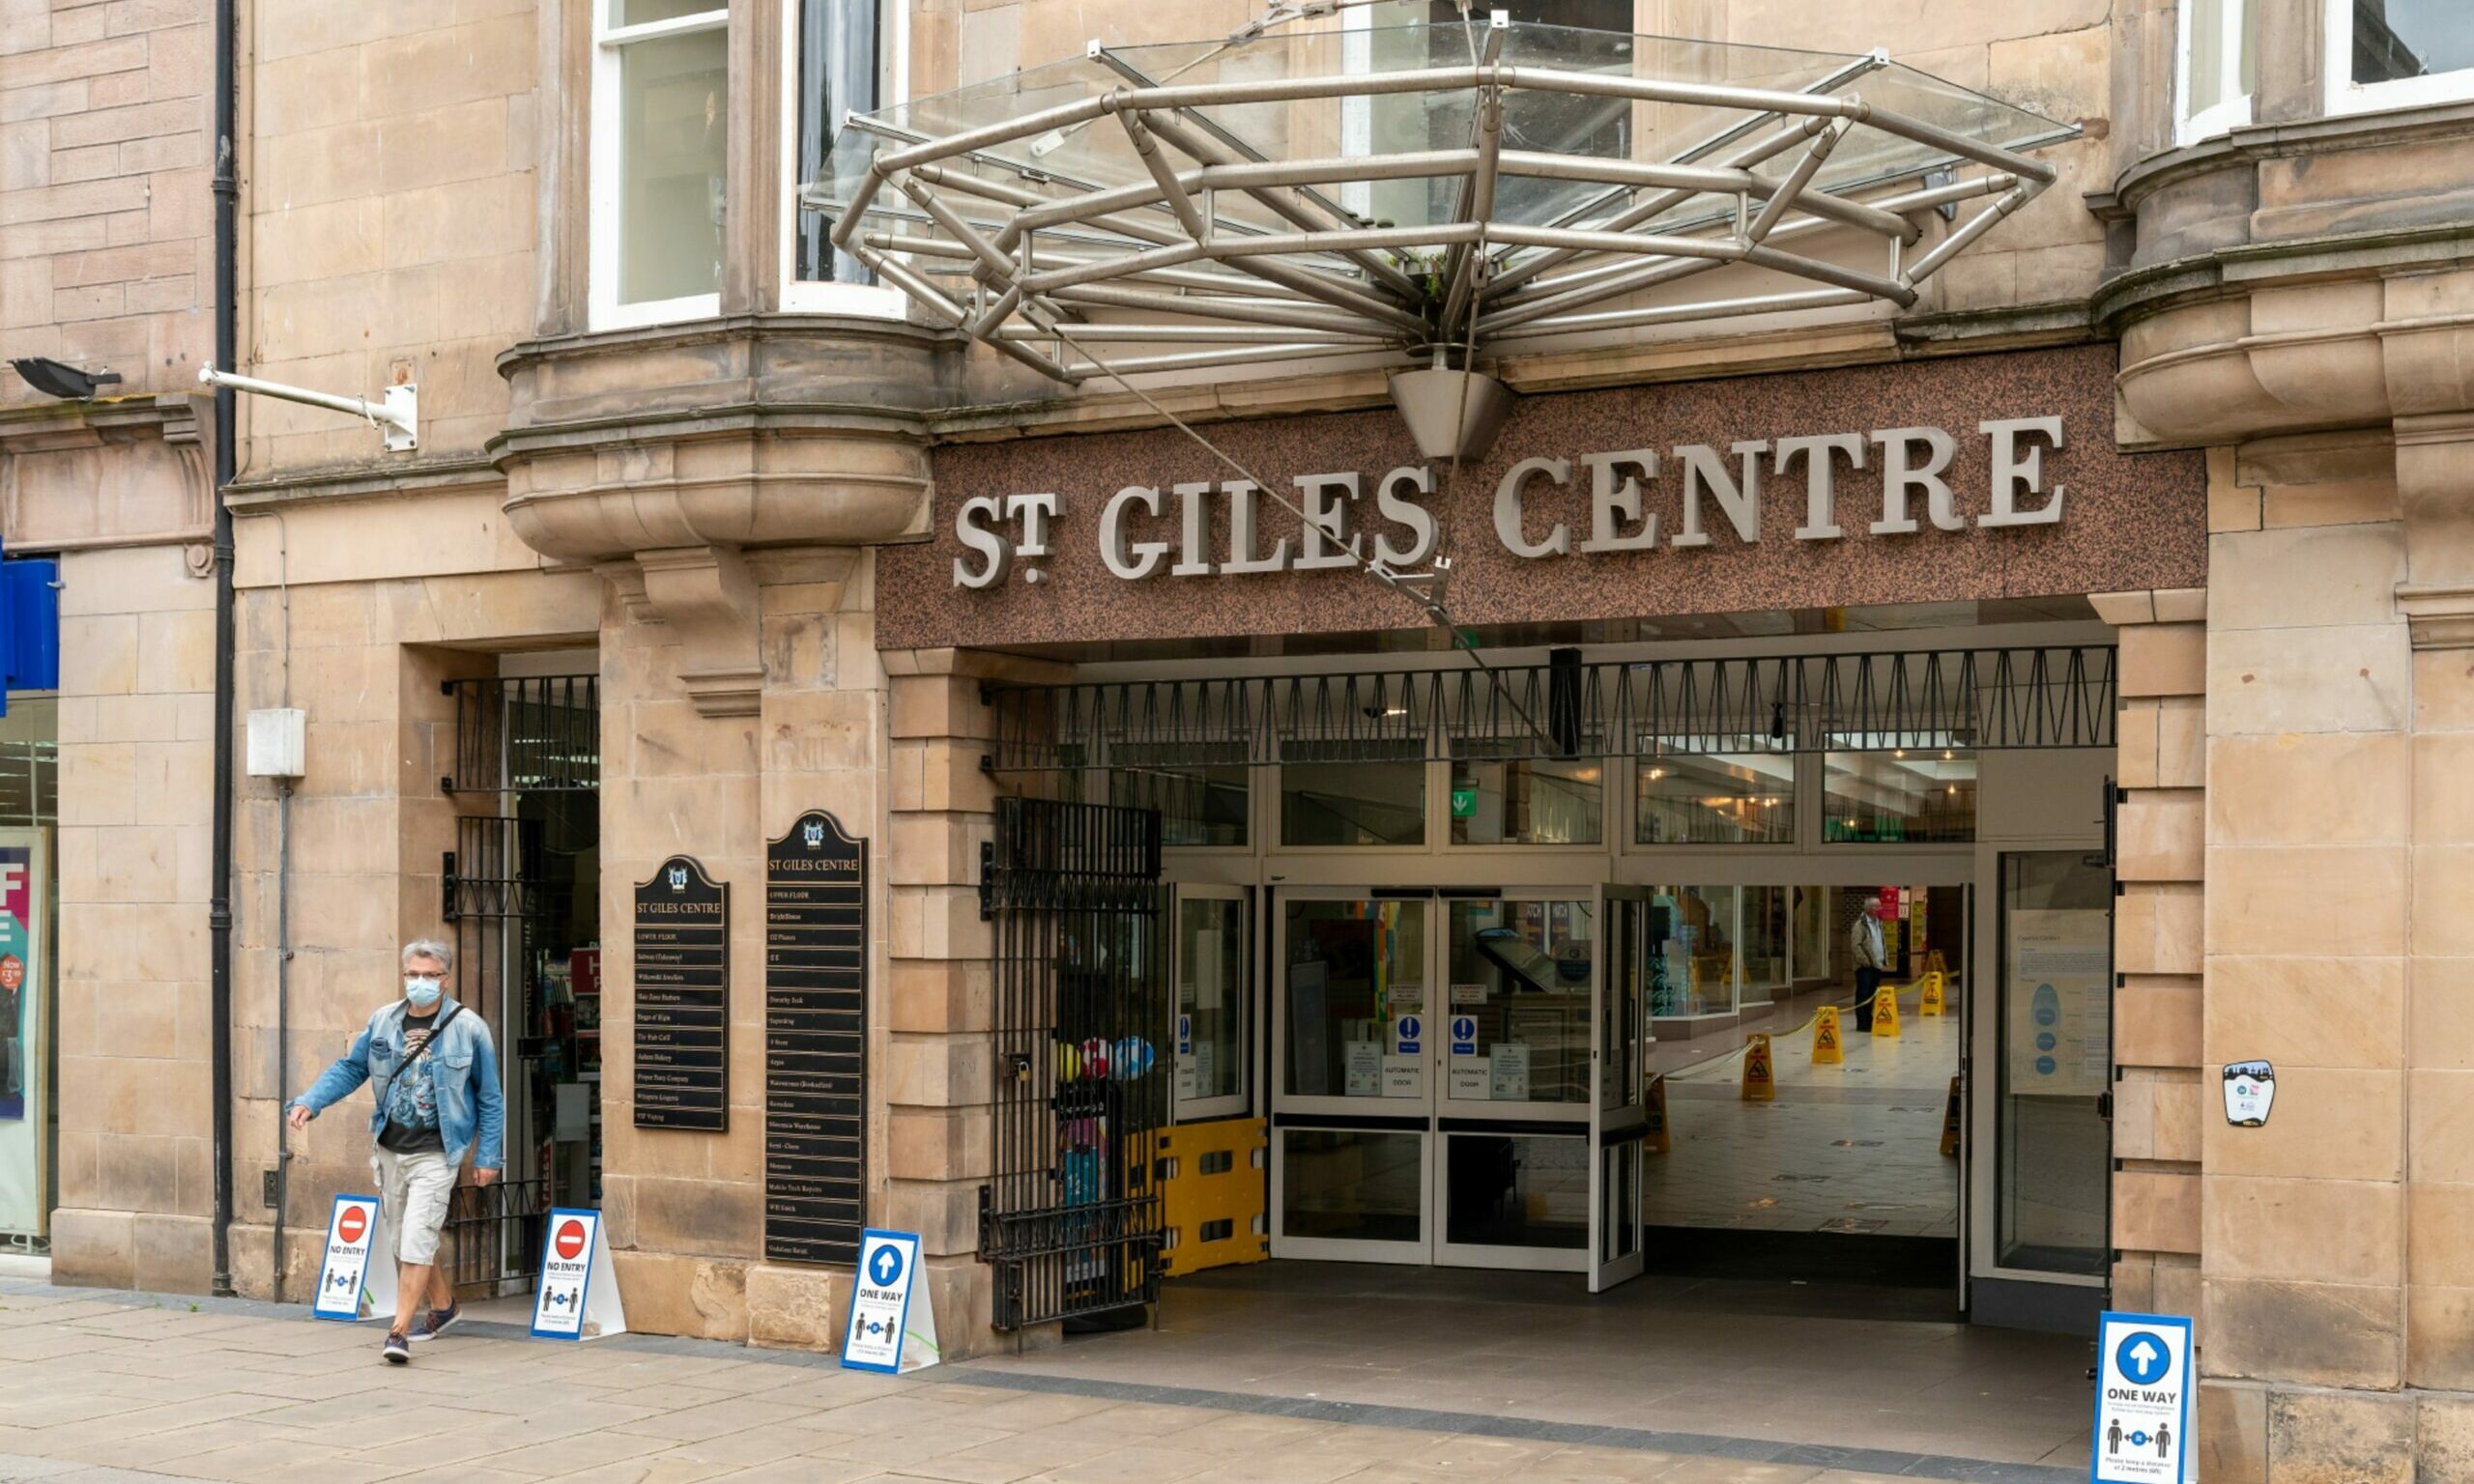 Looking at entrance to St Giles Centre from High Street. 